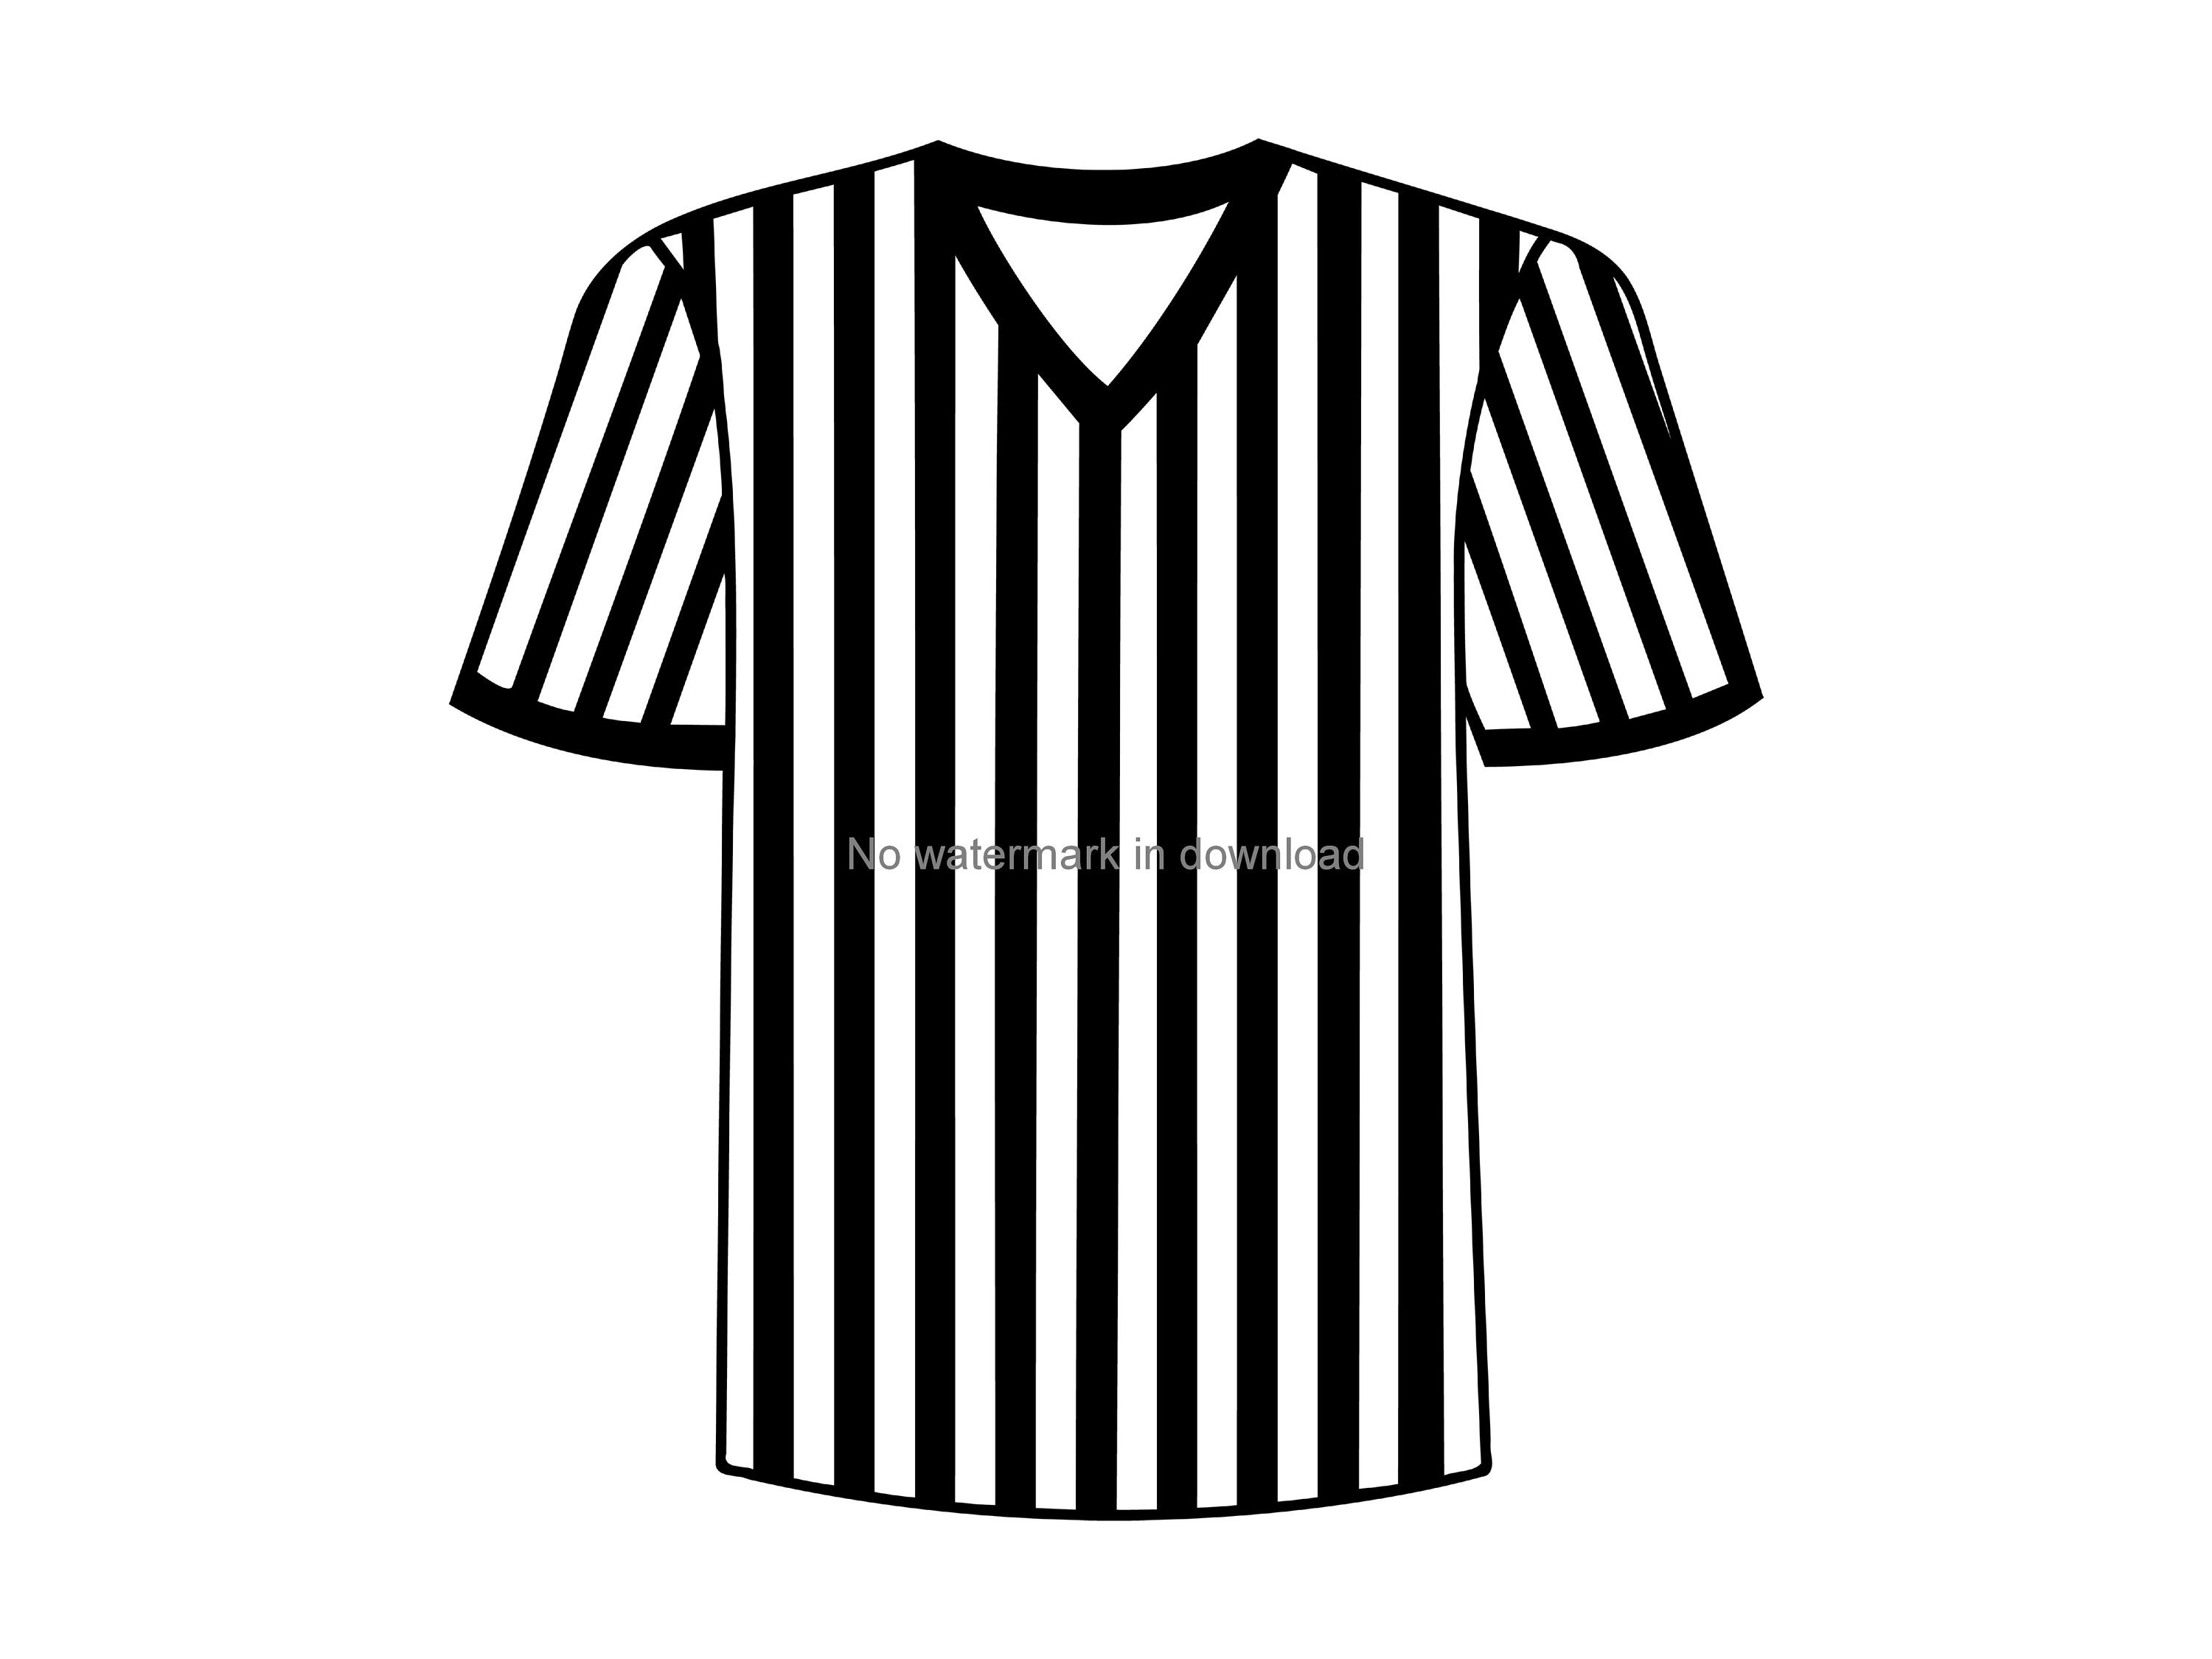 Basketball Jersey PNG Transparent Images Free Download, Vector Files